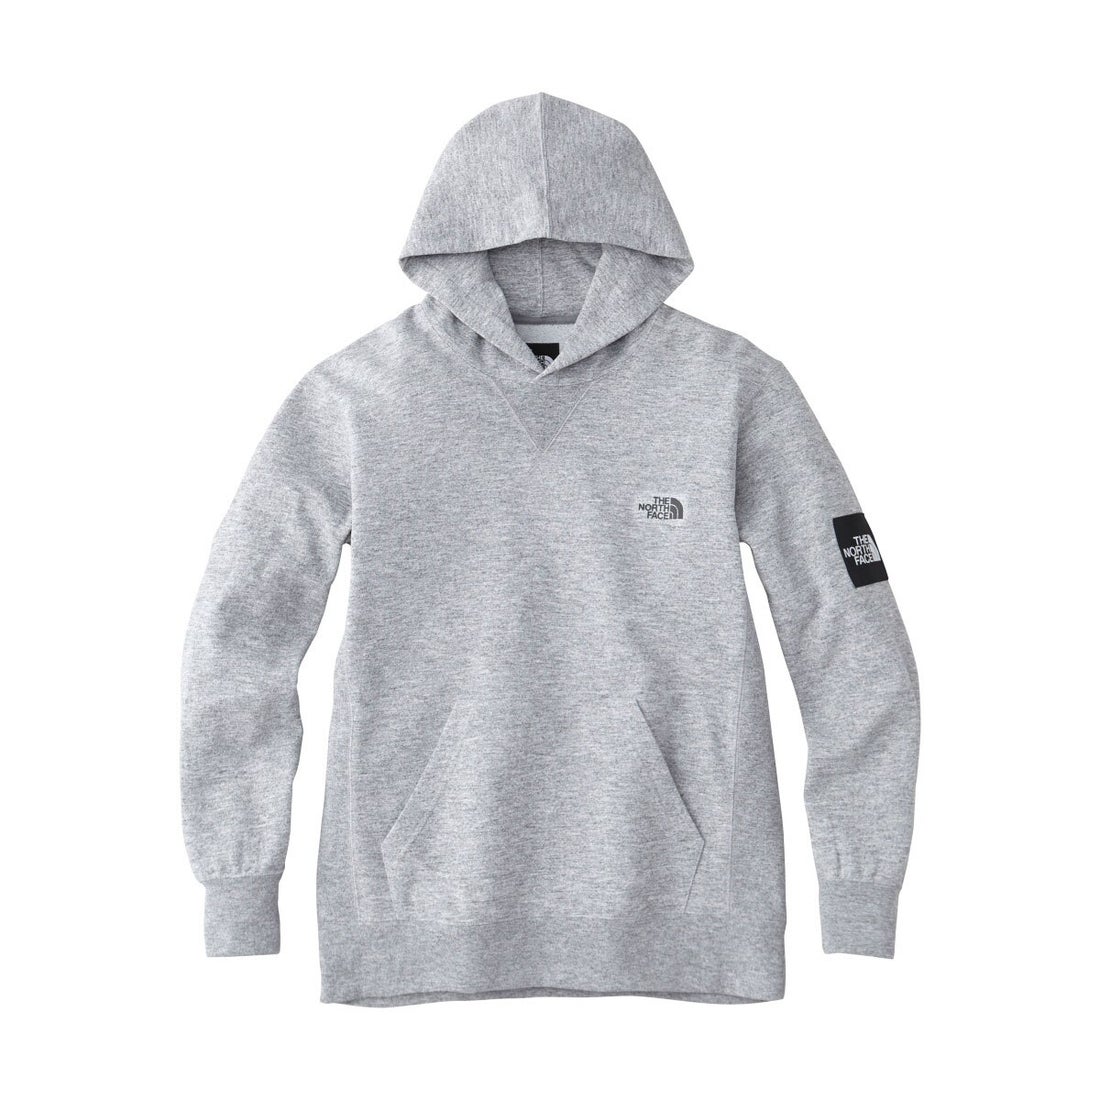 the north face square logo hoodie